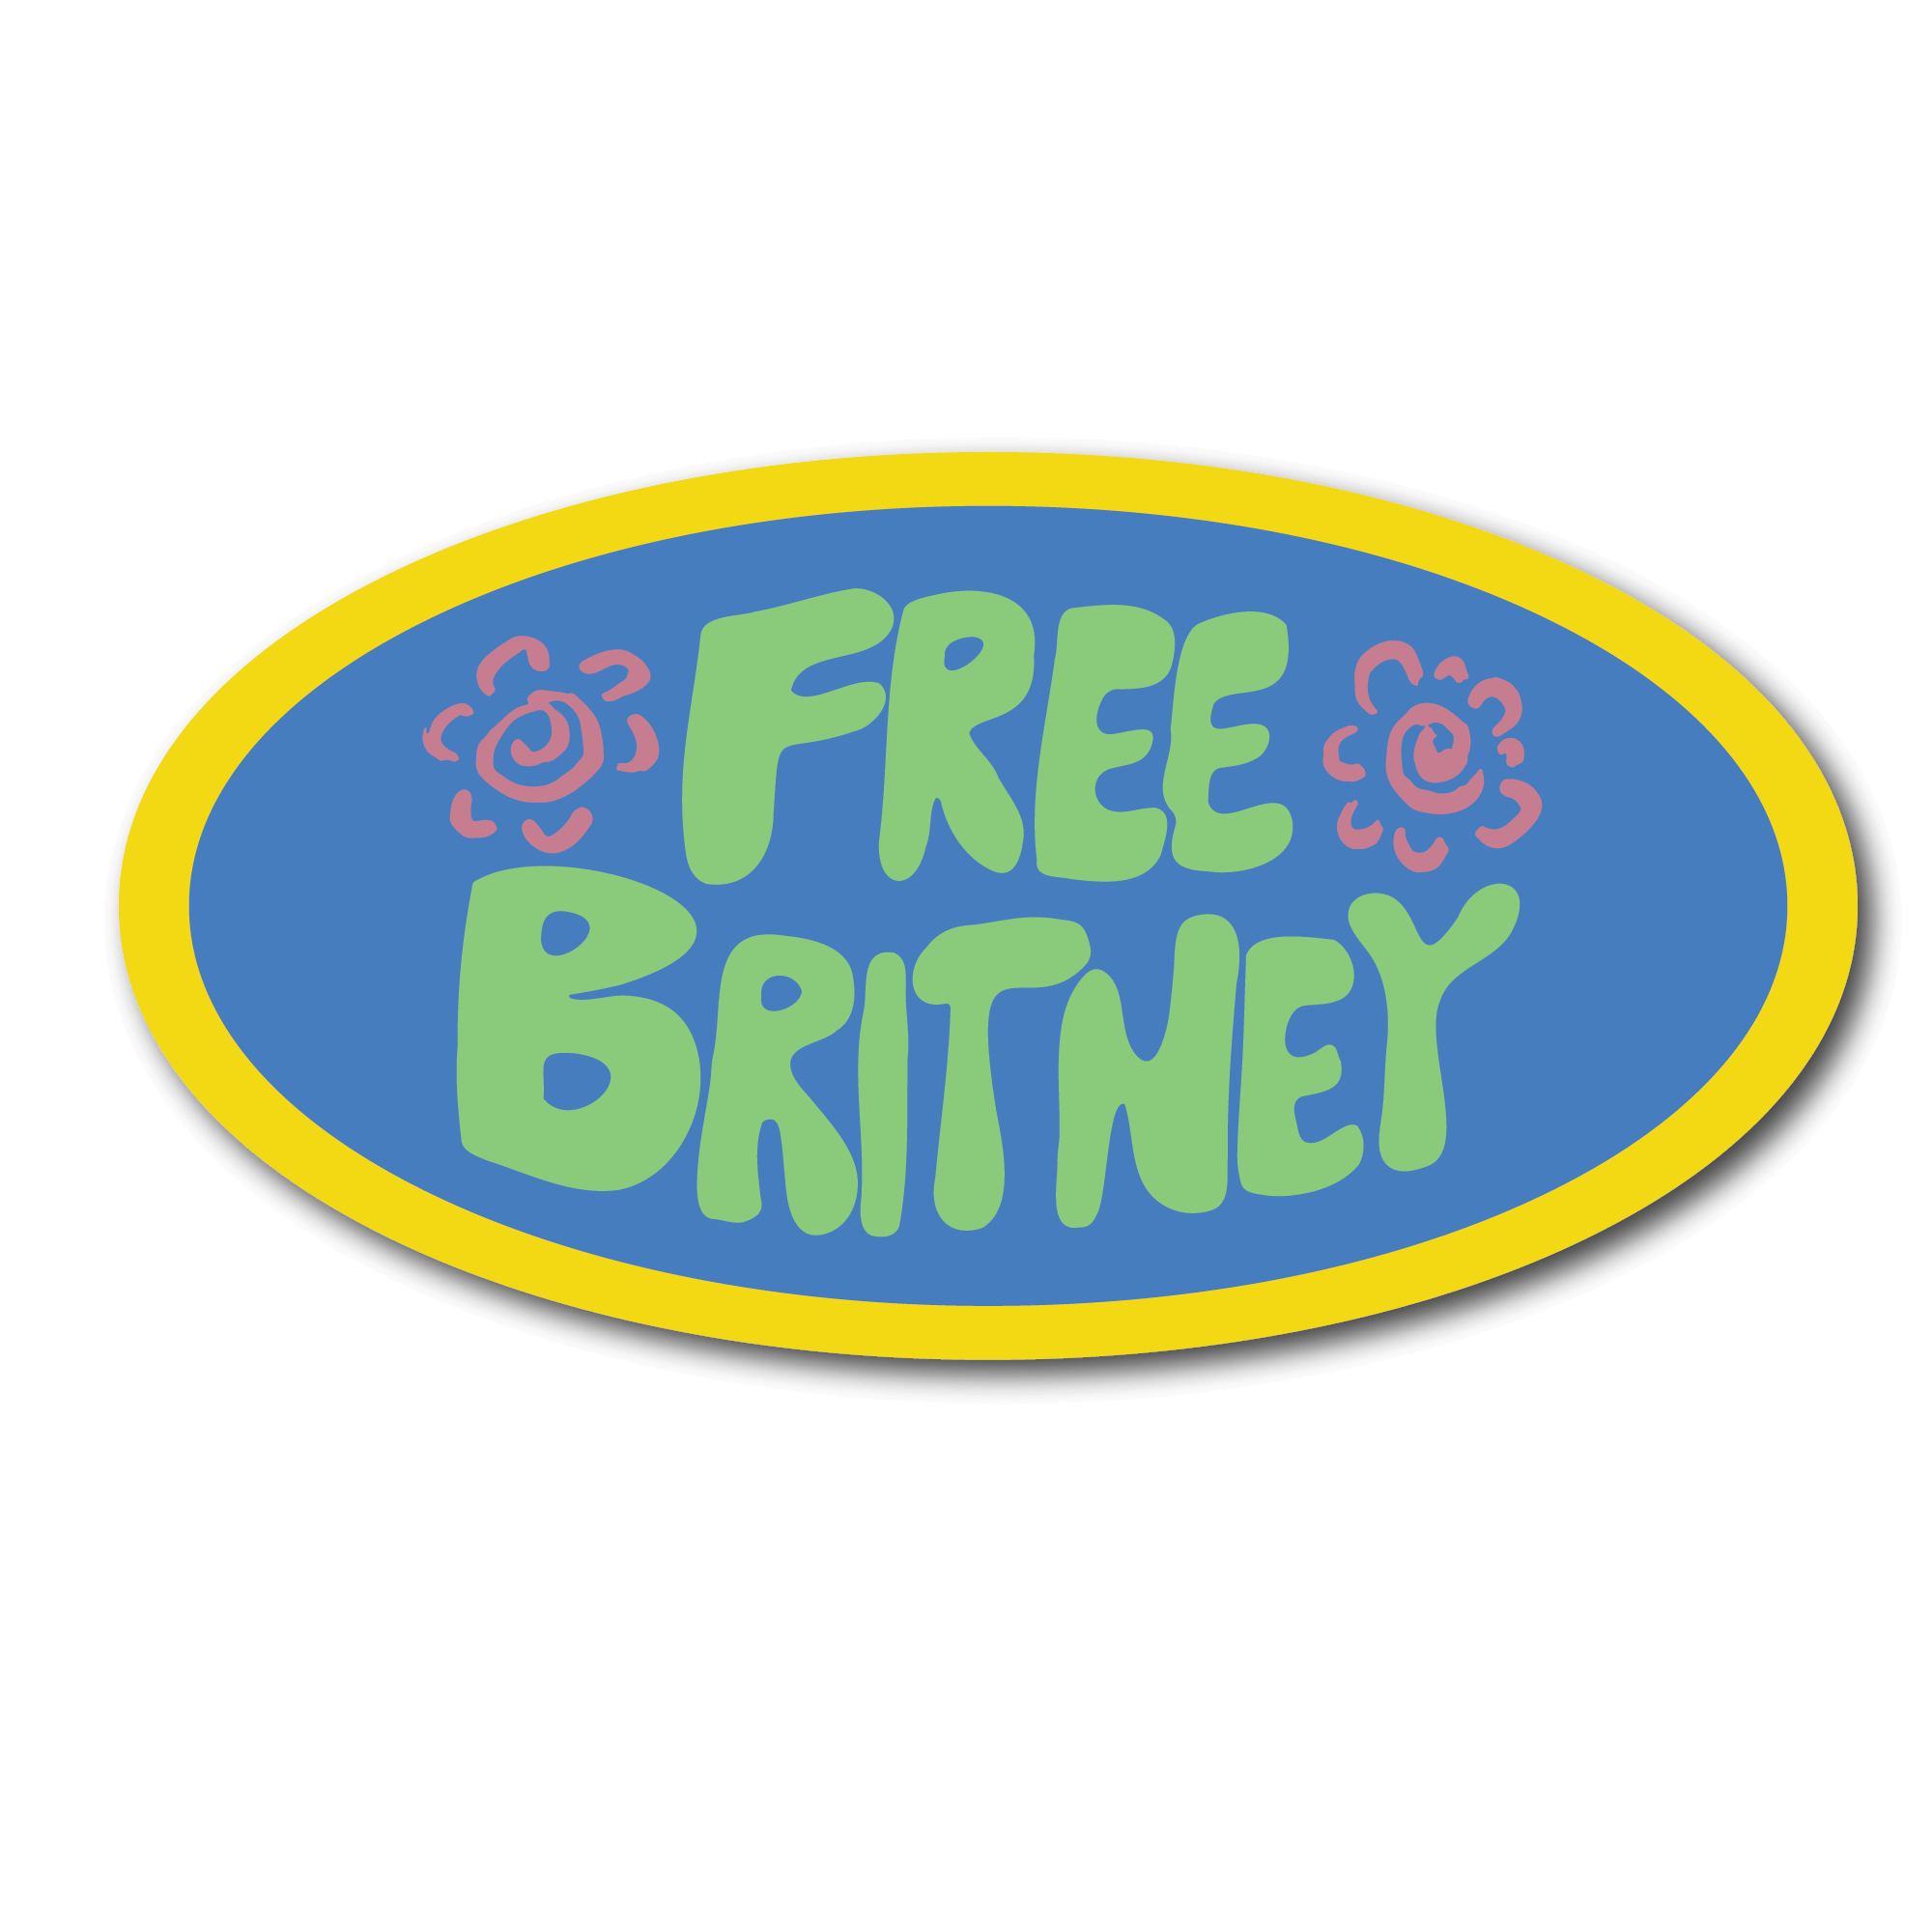 Small Sticker that says free Britney in green on a blue background with a yellow outline 